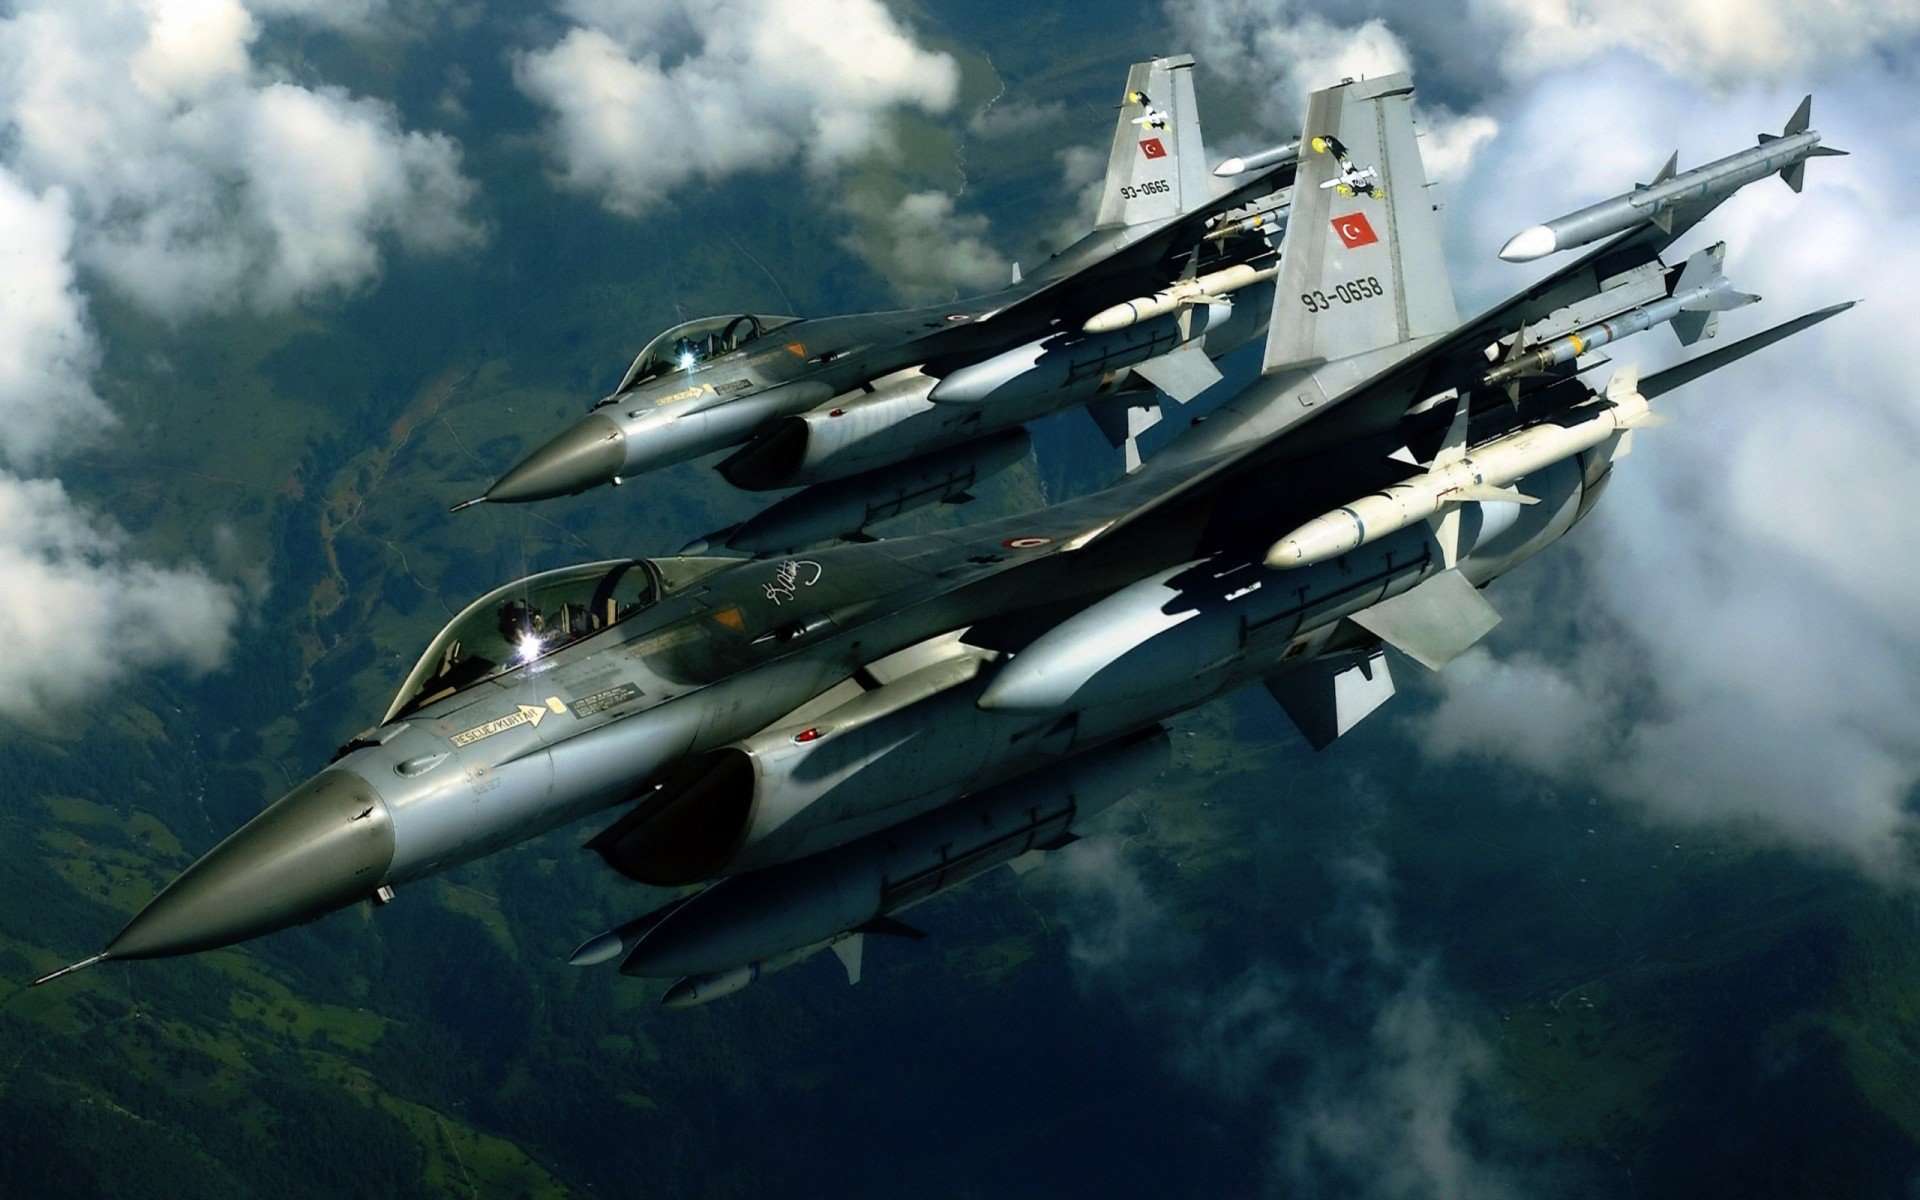 Turkish Air Force, Turkish Armed Forces, Jet fighter Wallpaper